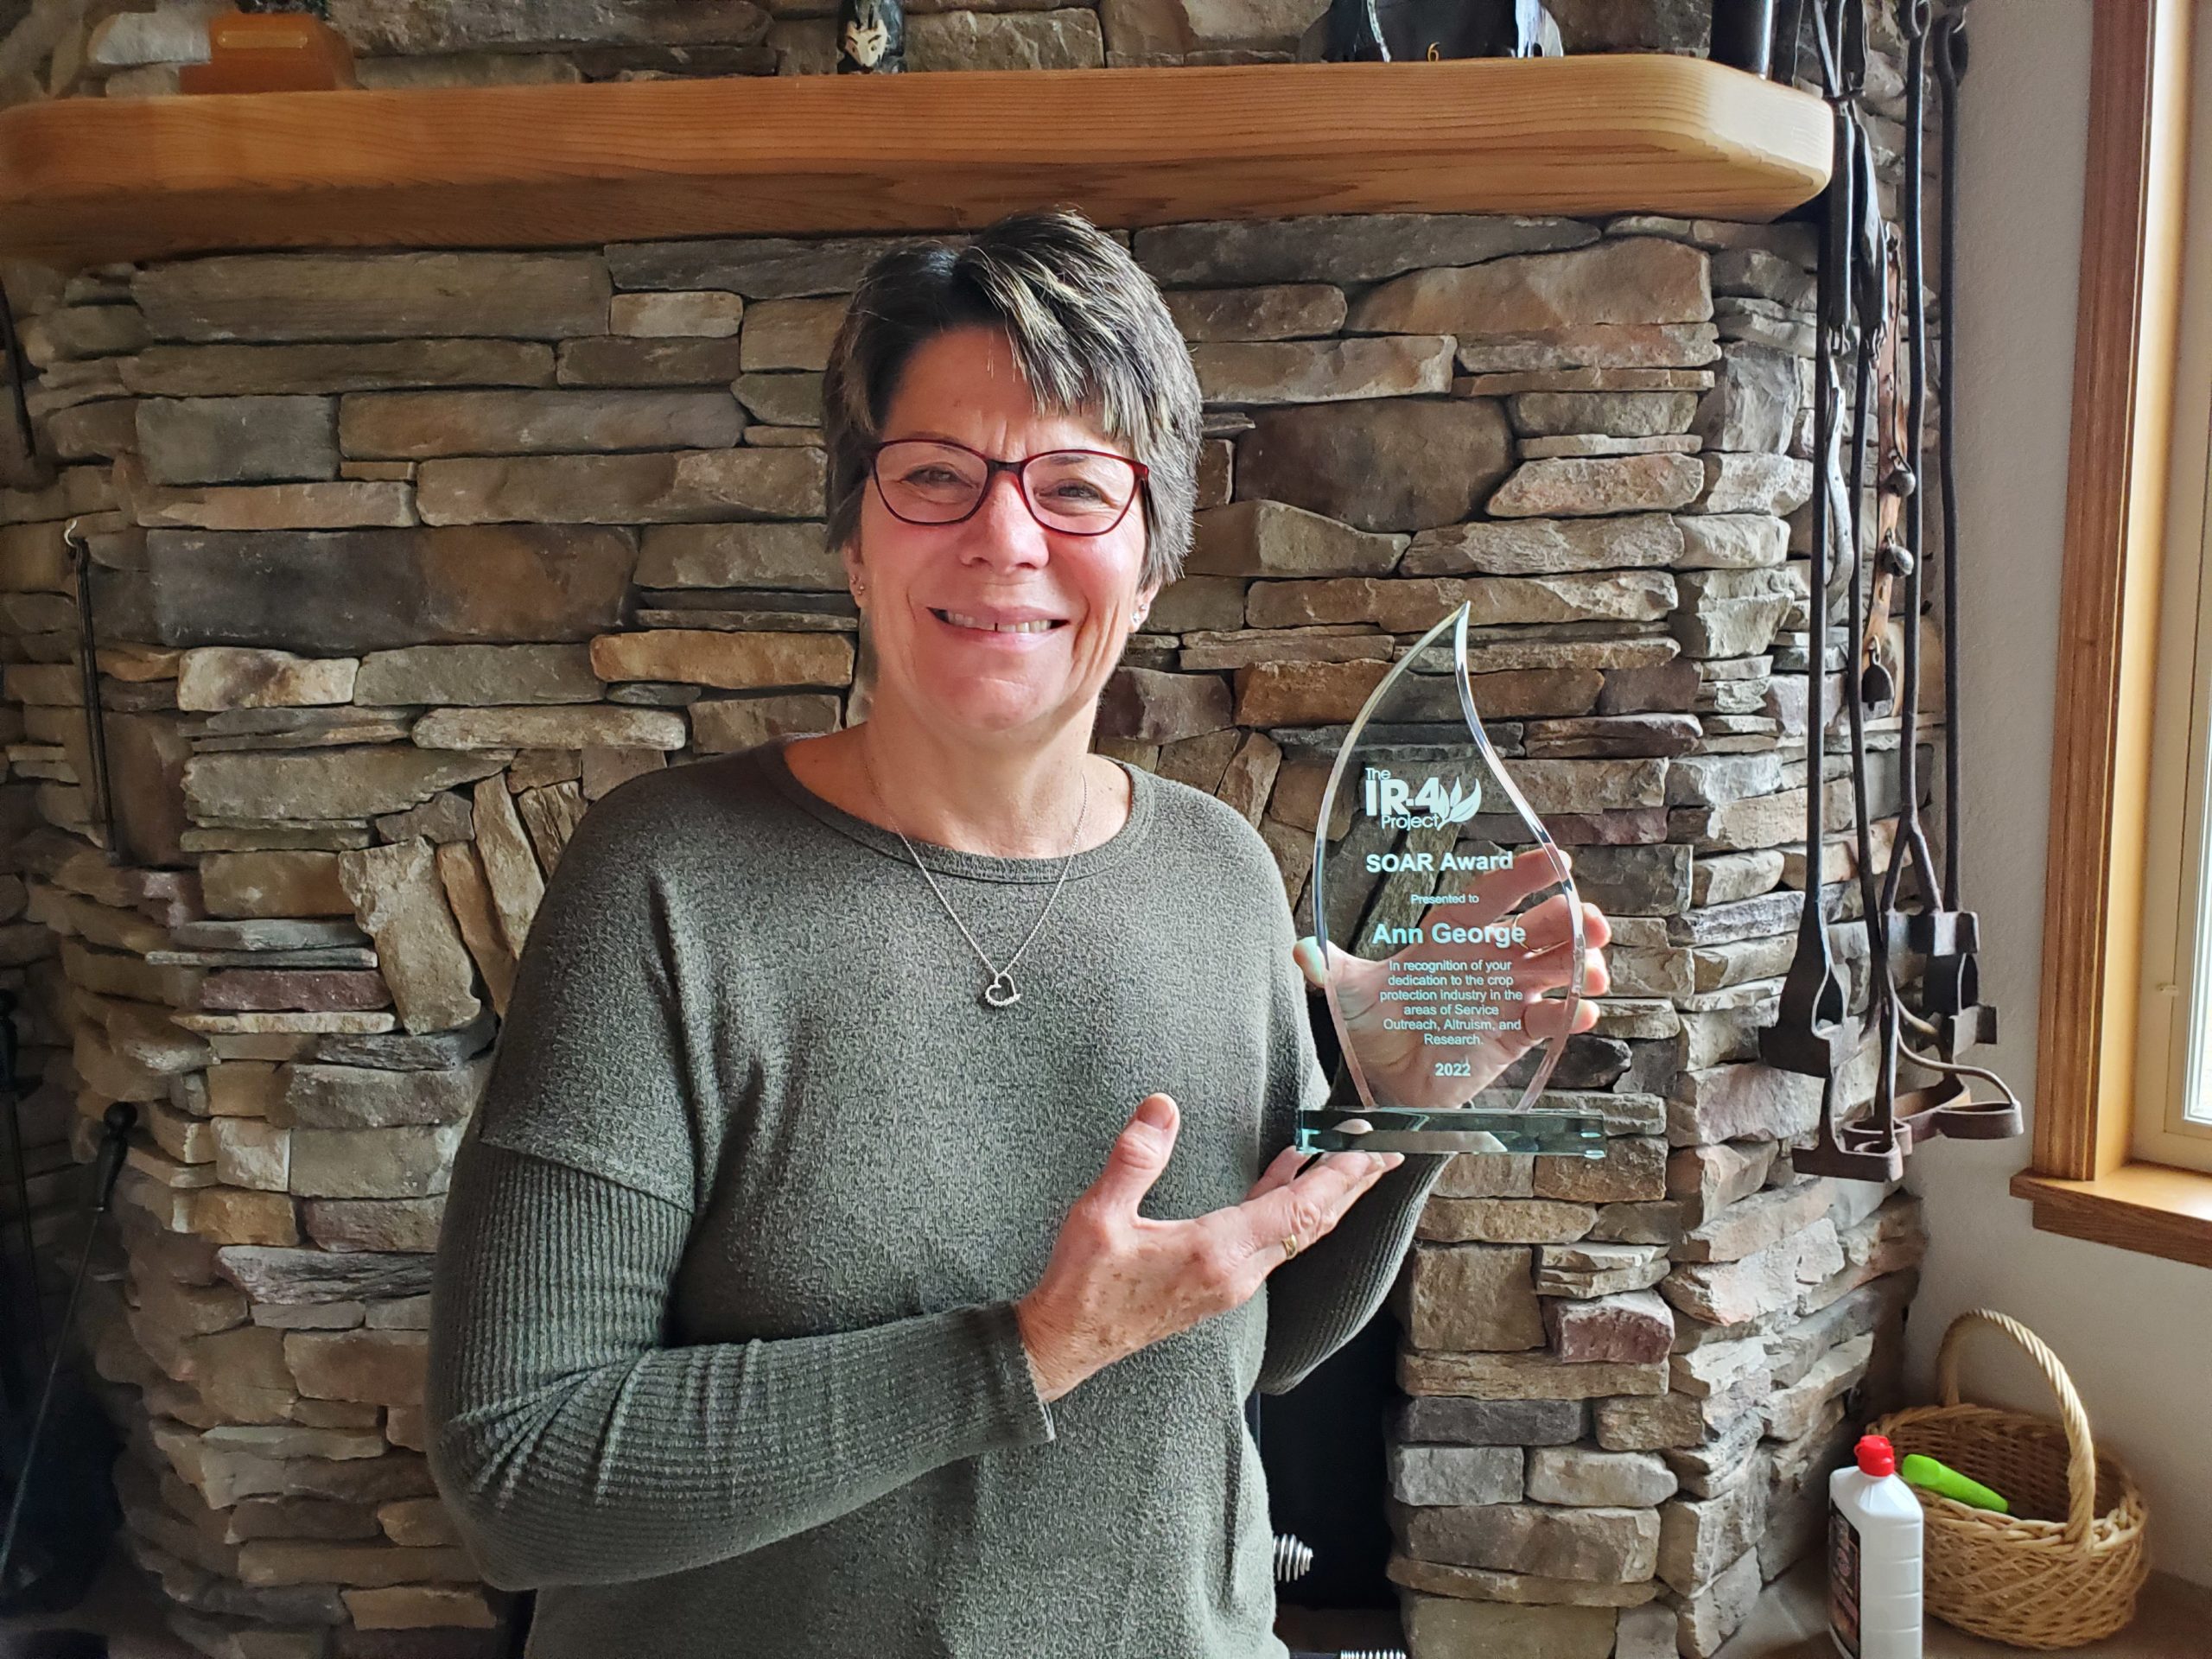 Woman with short hair and glasses standing in front of a fireplace and holding an award that says "IR-4 Project SOAR Award presented to Ann George"